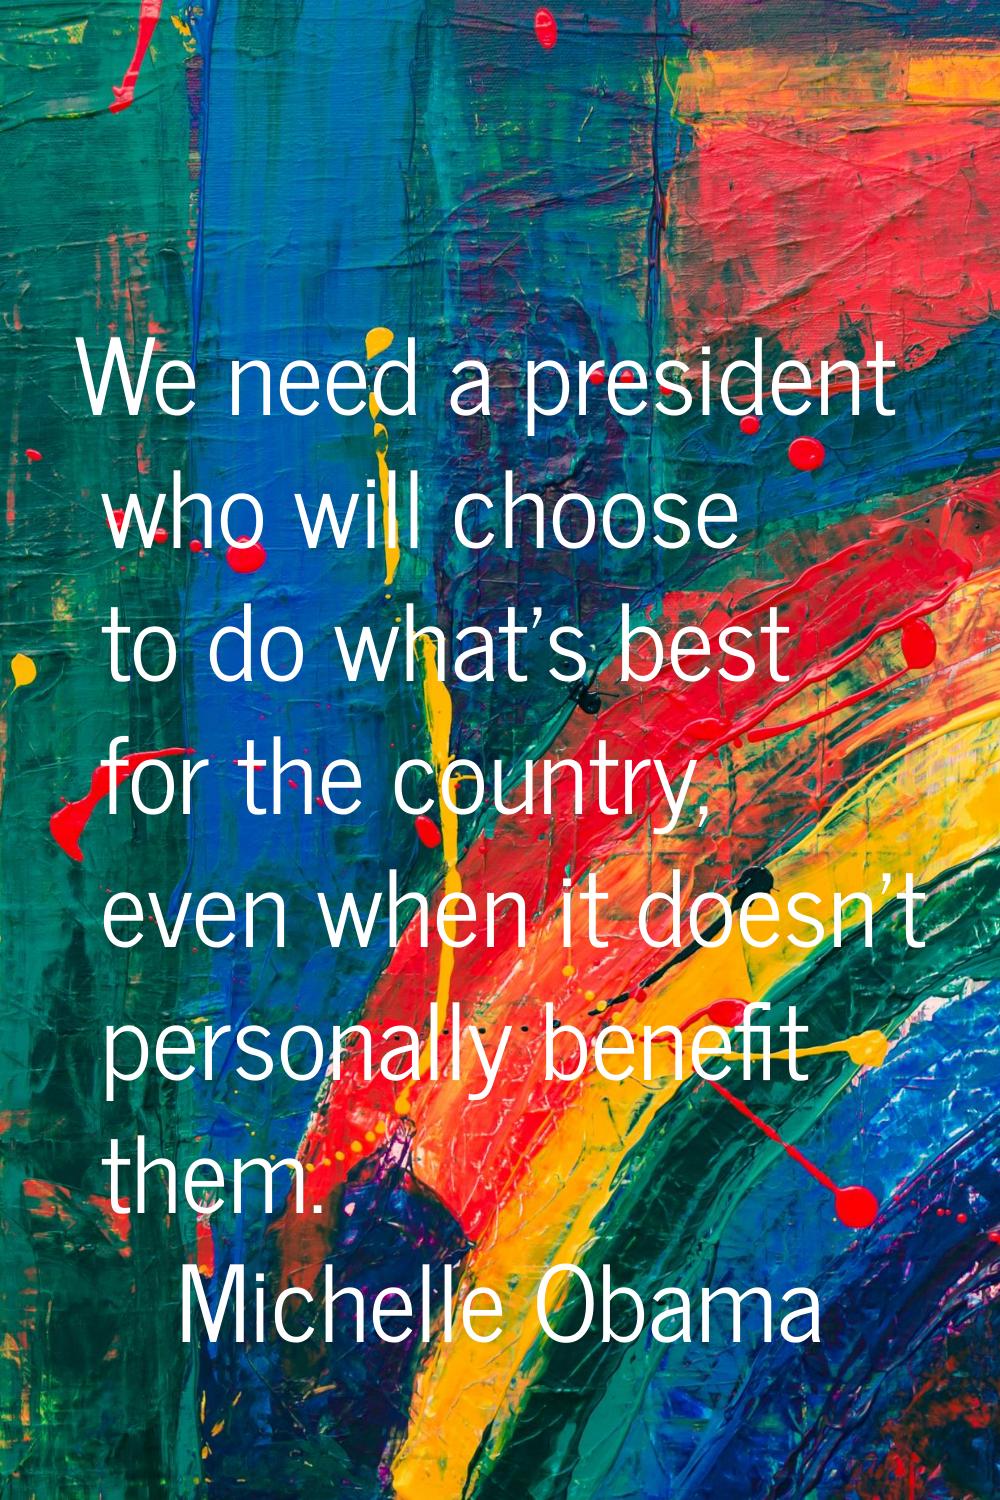 We need a president who will choose to do what's best for the country, even when it doesn't persona